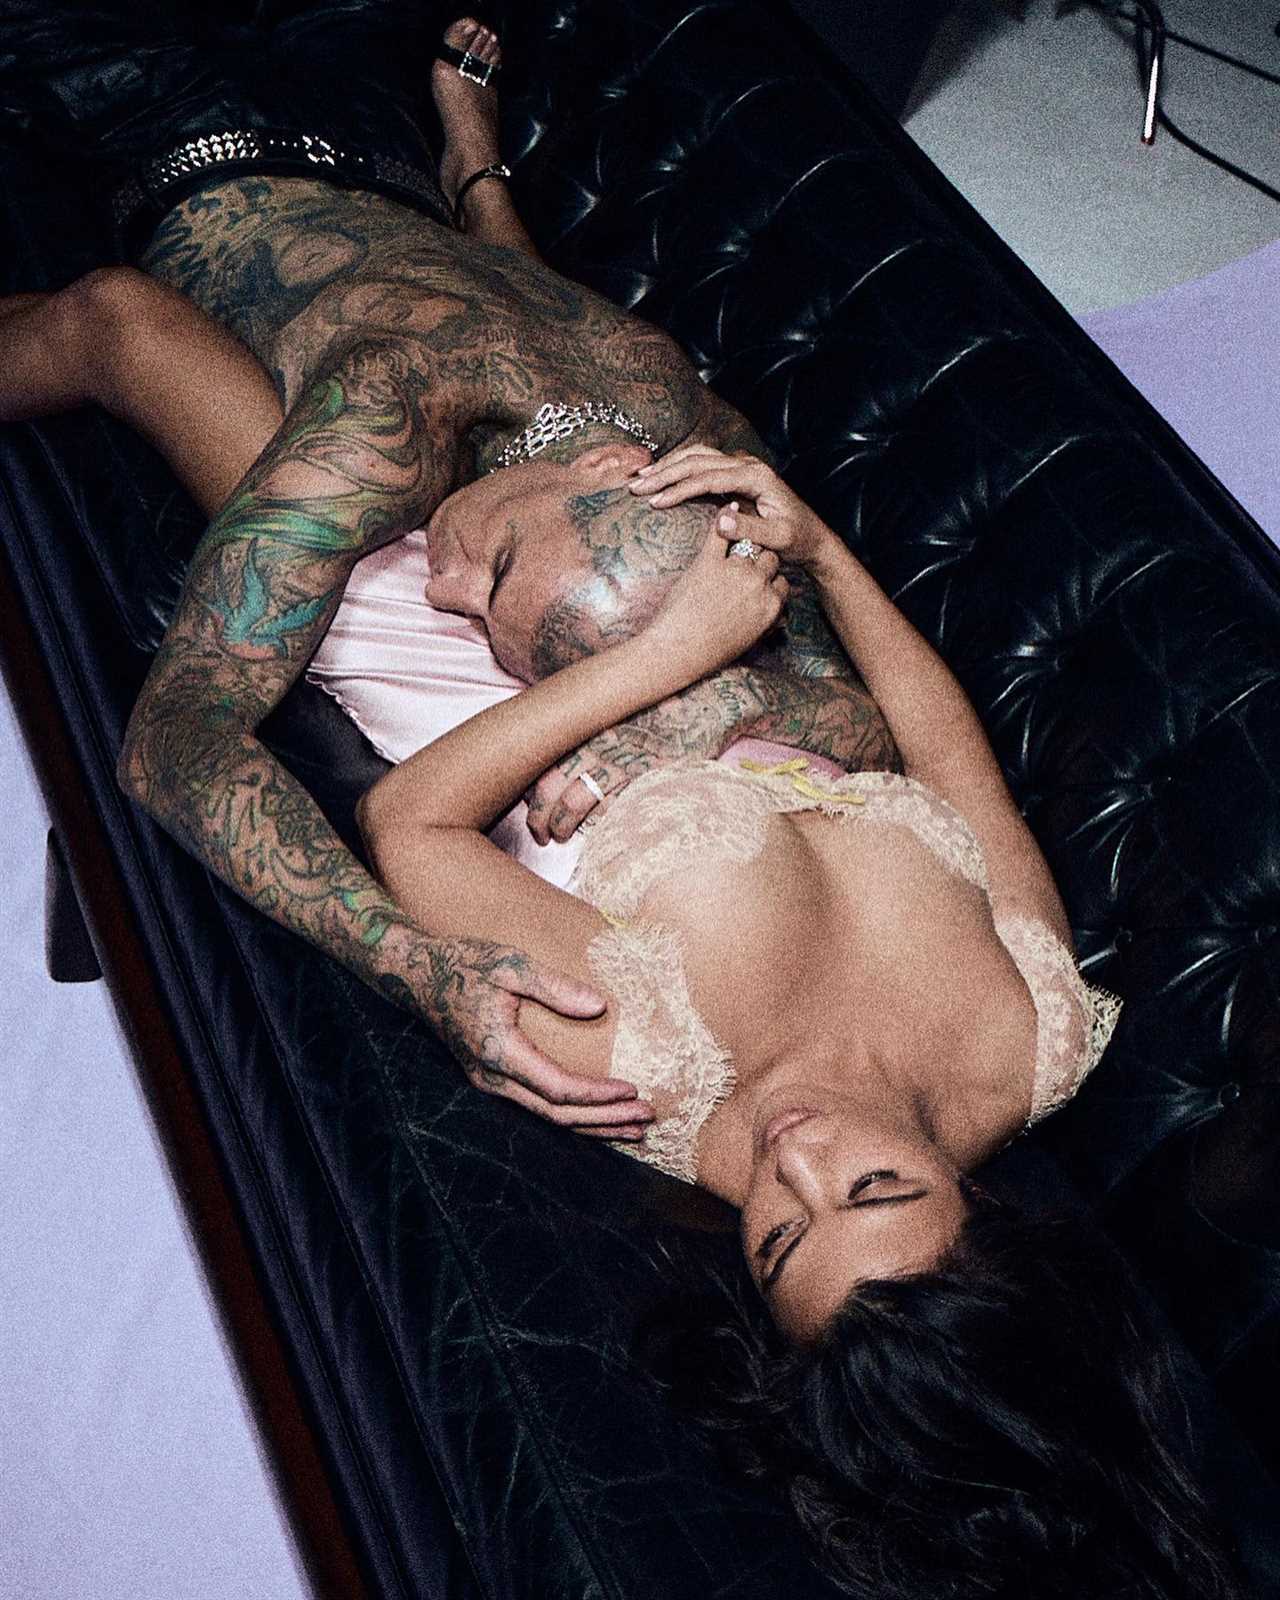 Kourtney Kardashian ditches her underwear and flashes her bare butt in raunchy new PDA pics with husband Travis Barker